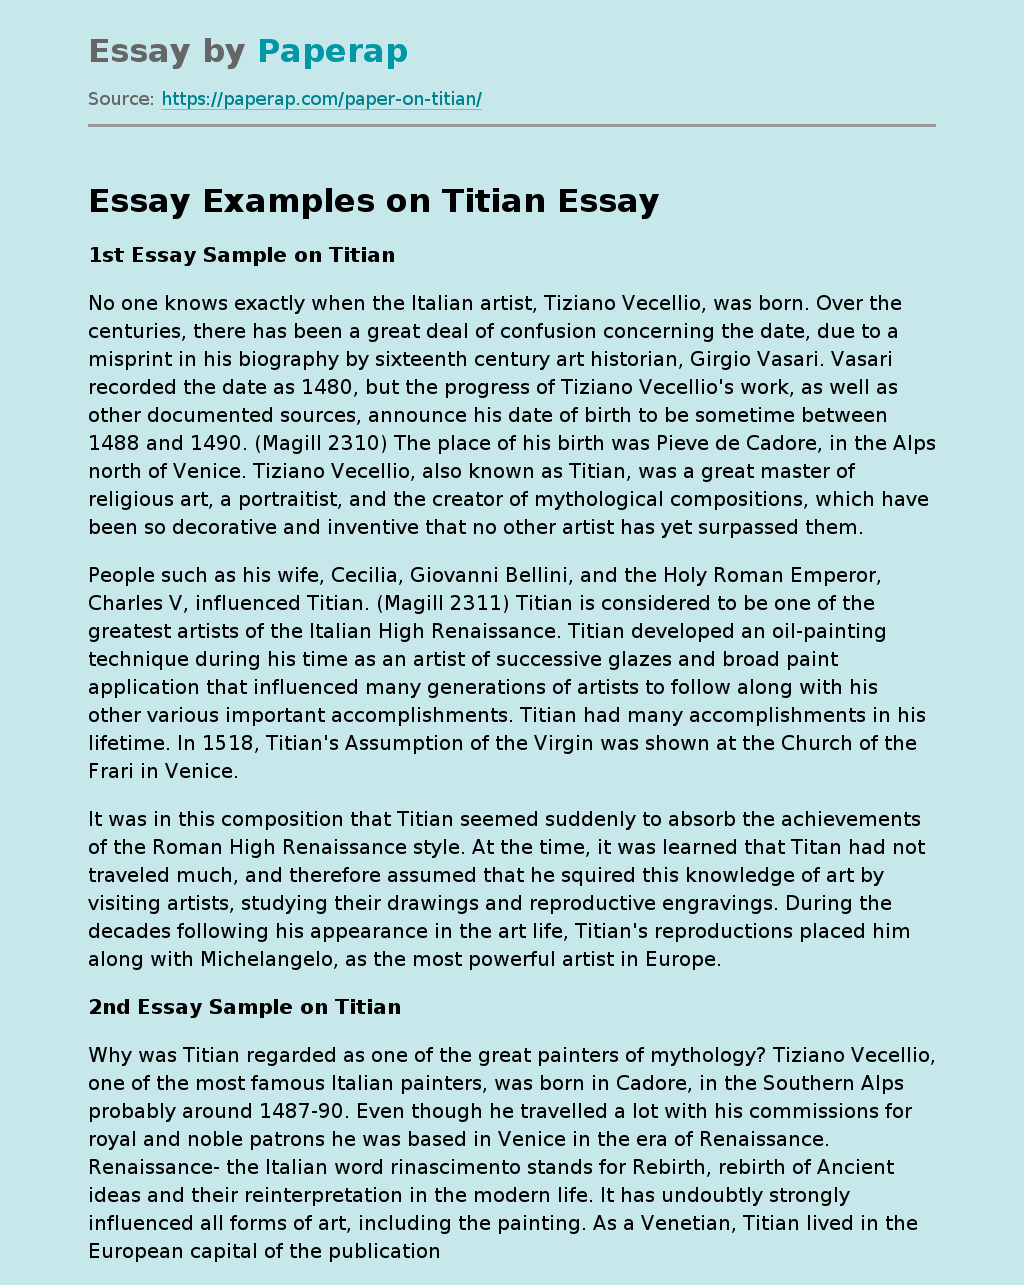 Essay Examples on Titian